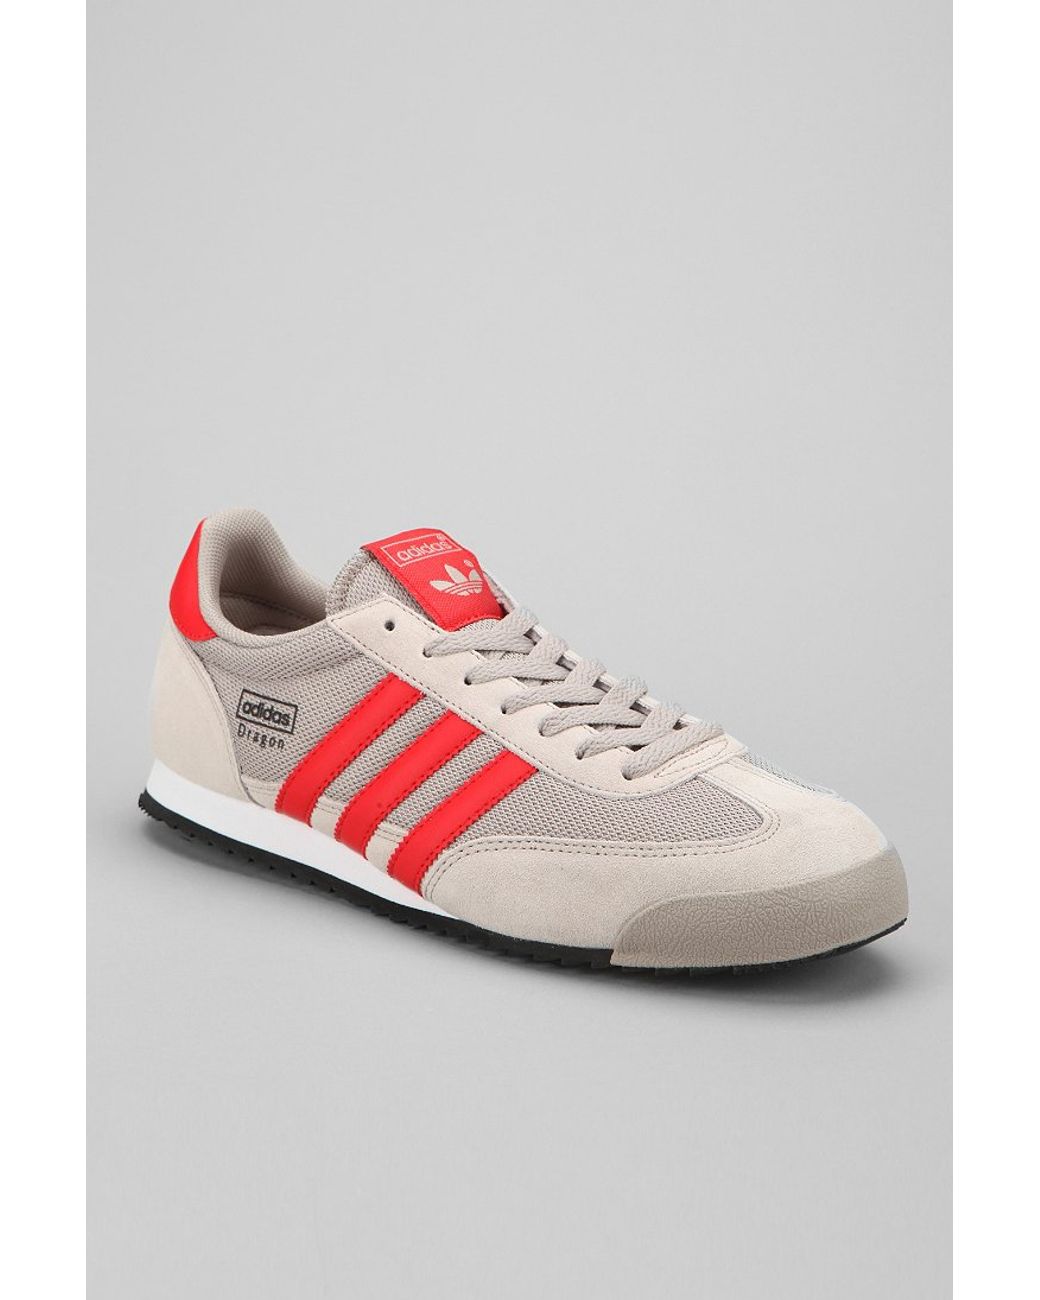 adidas Dragon Sneaker in for | Lyst